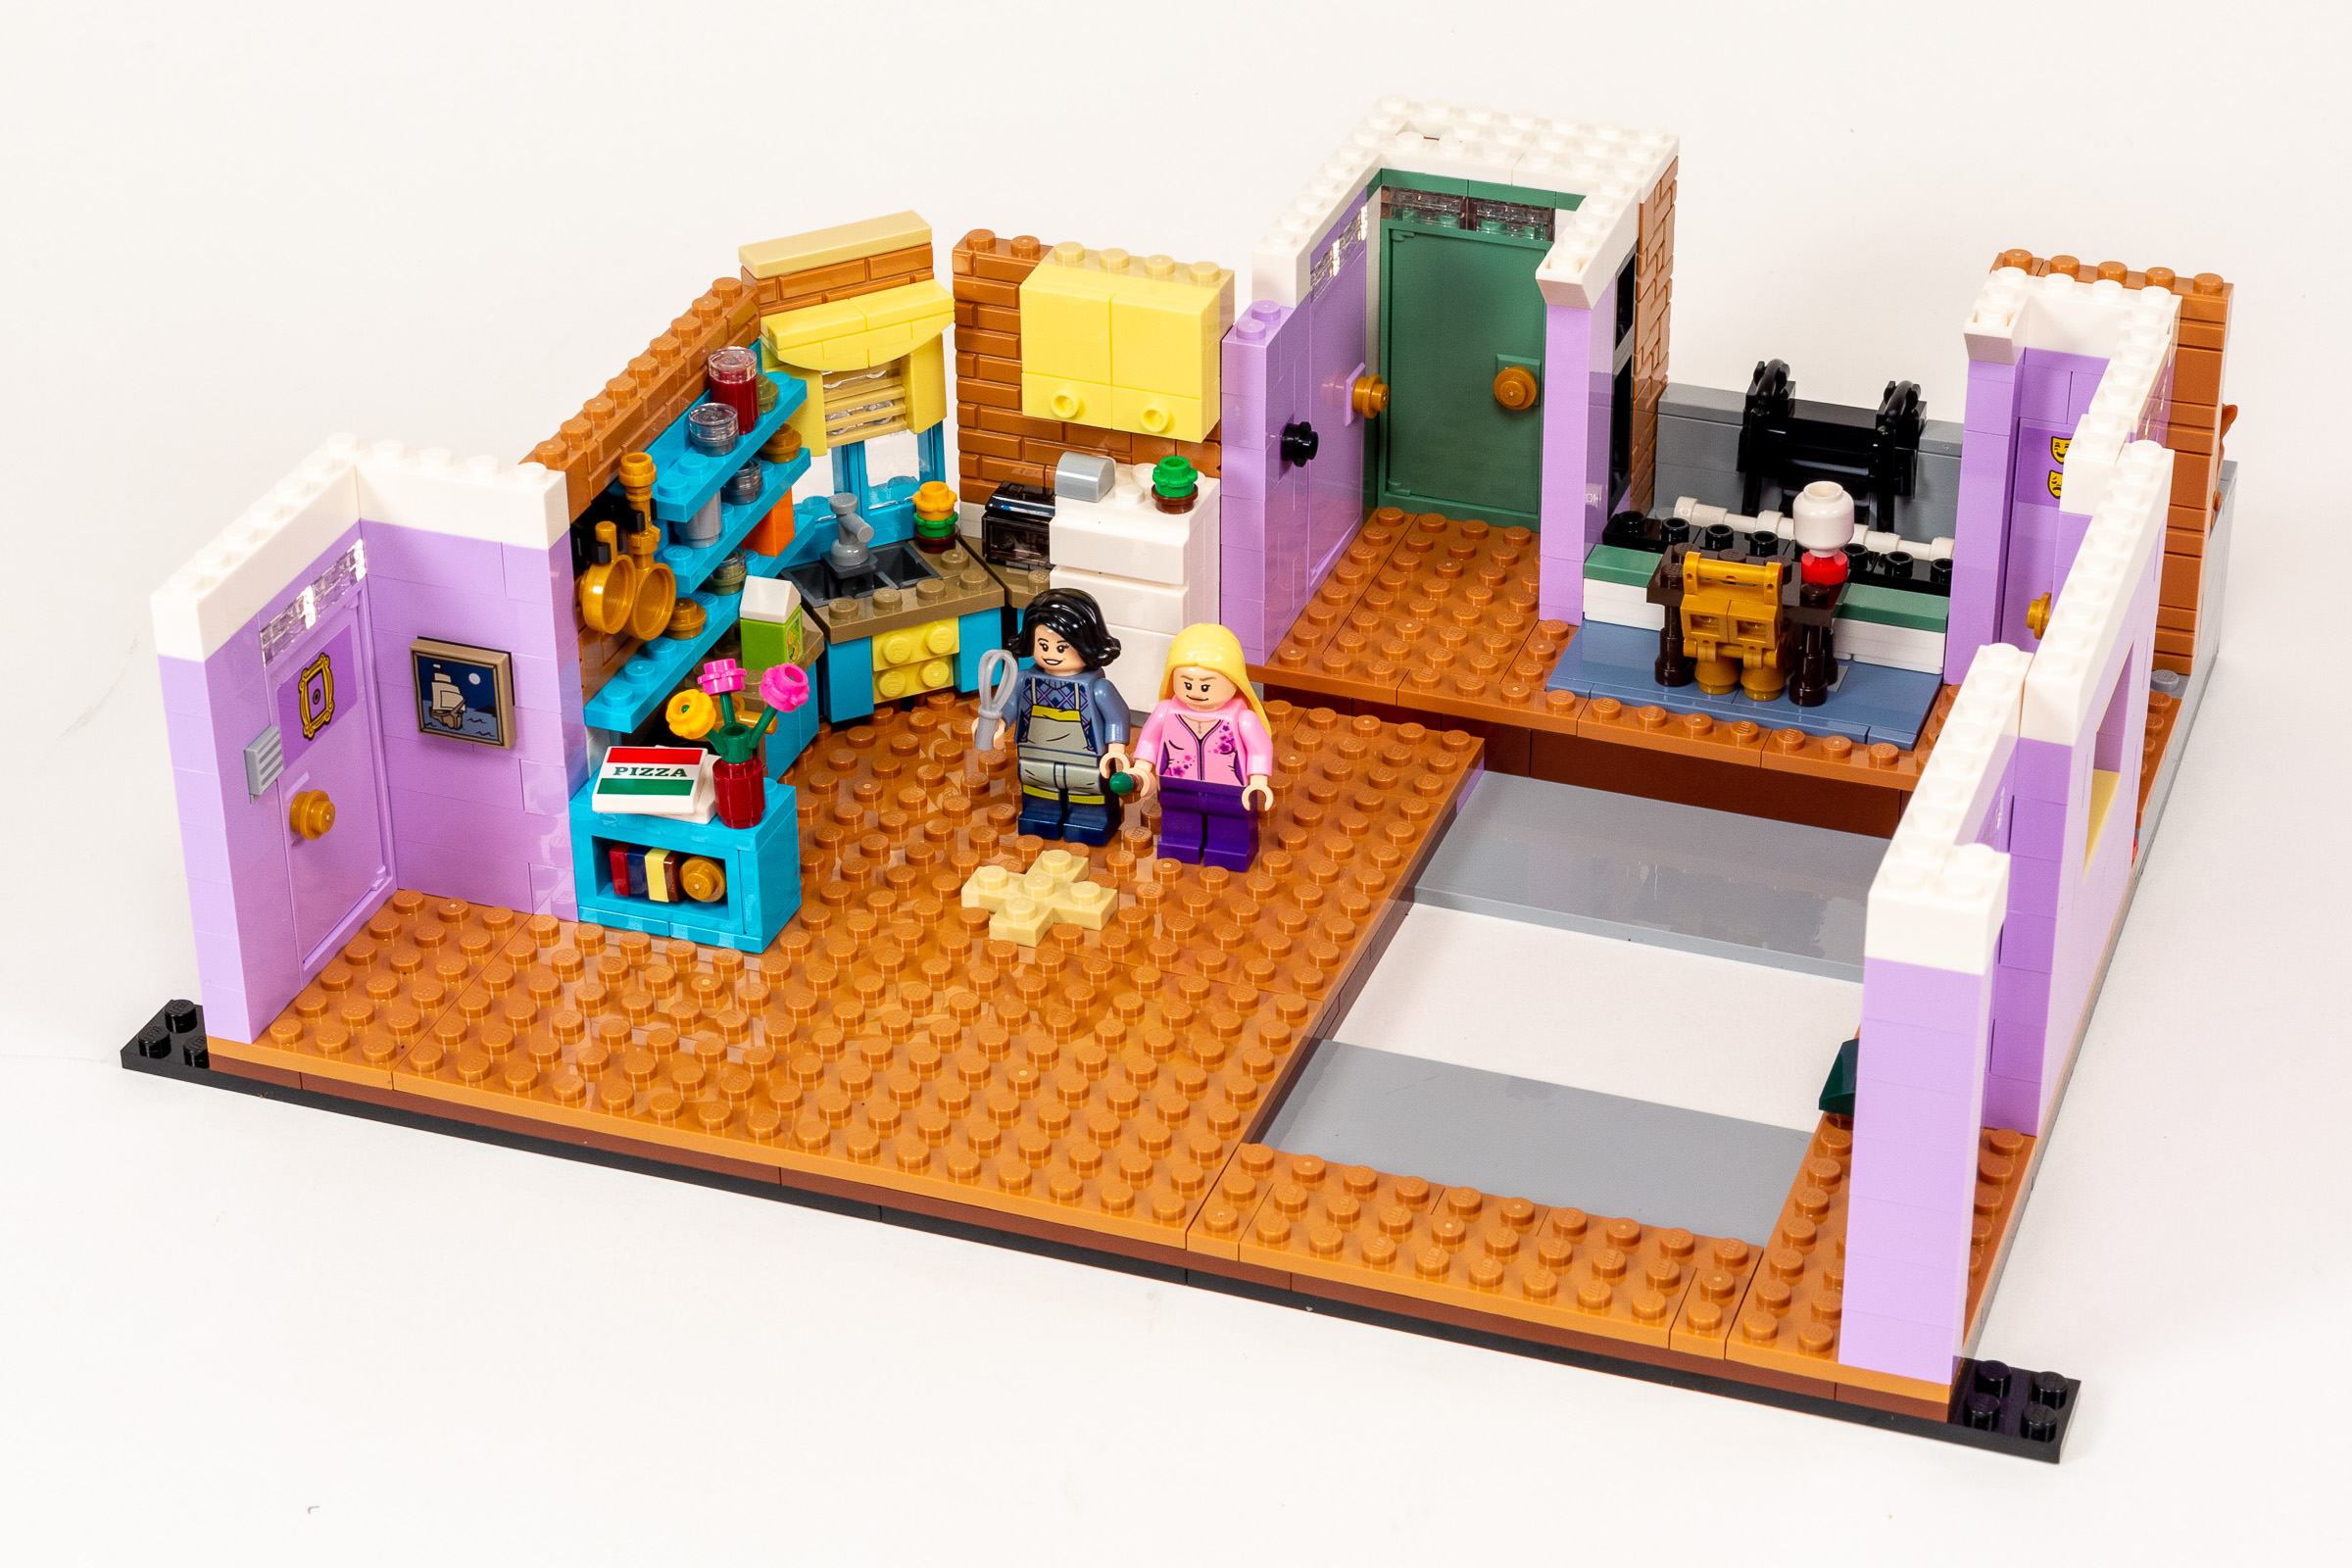 LEGO FRIENDS The Apartments (10292) Officially Announced - The Brick Fan